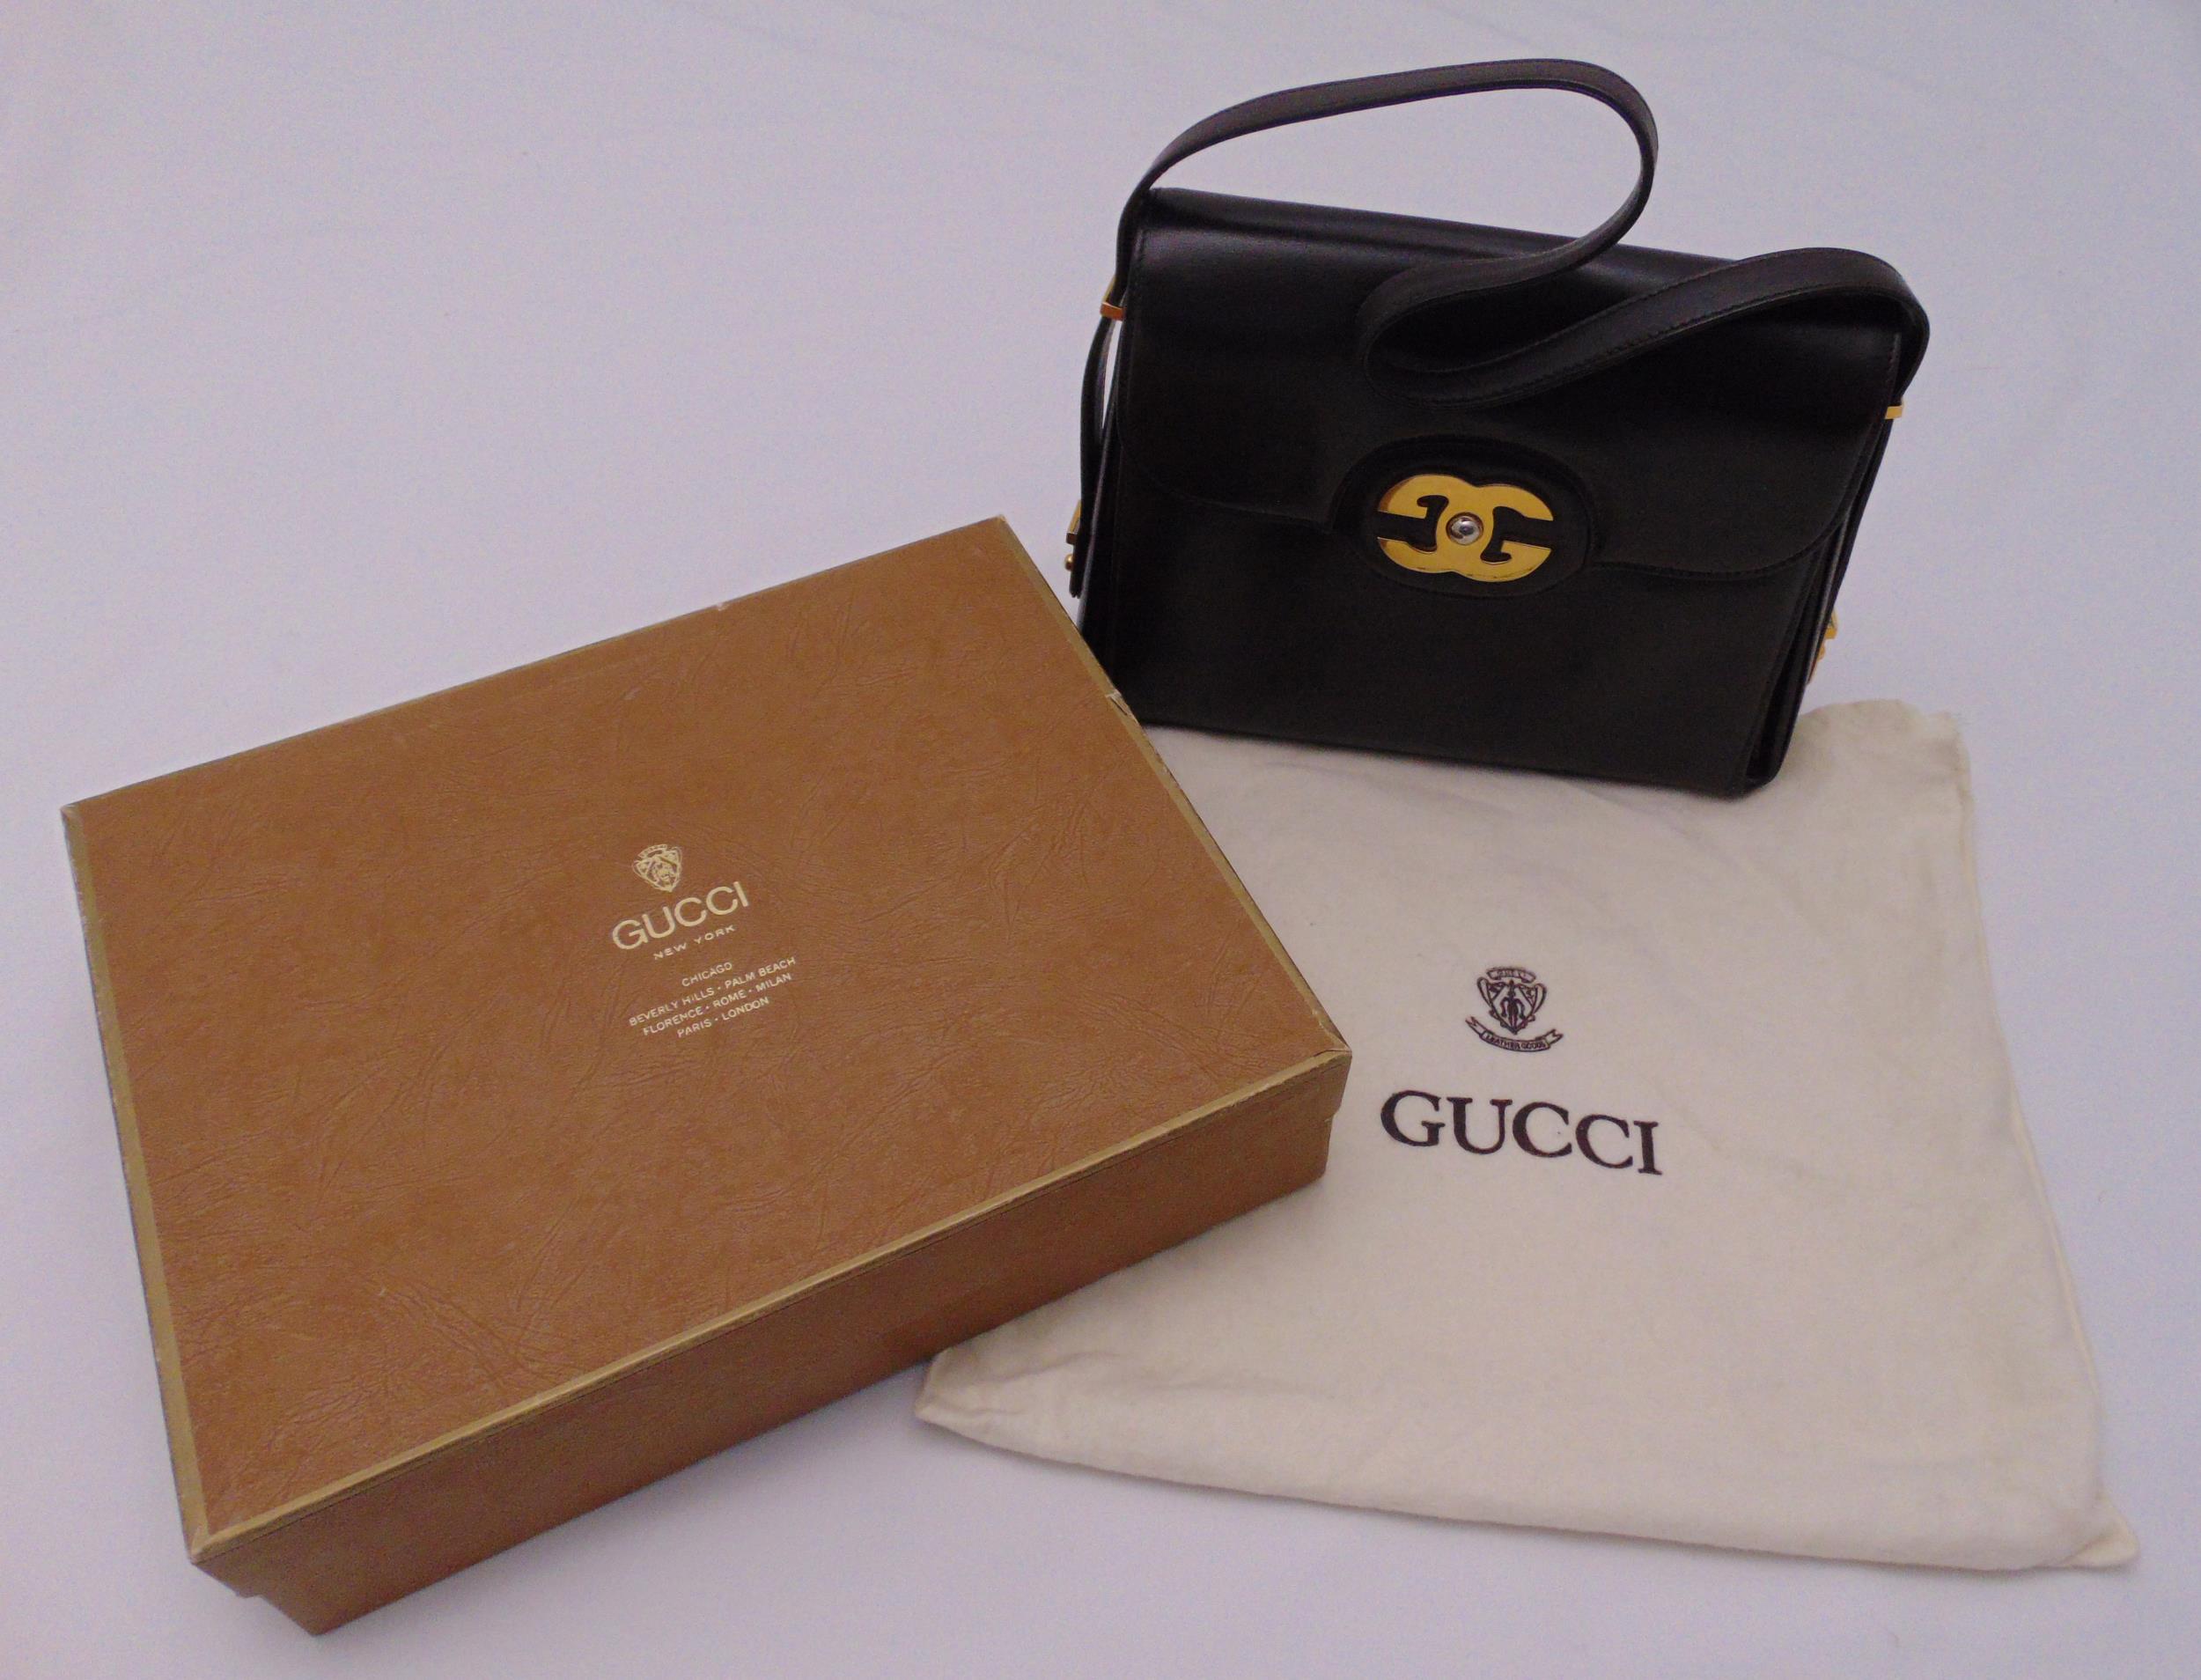 Gucci 1960s brown leather ladies handbag with initialled clasp and shoulder strap, in original